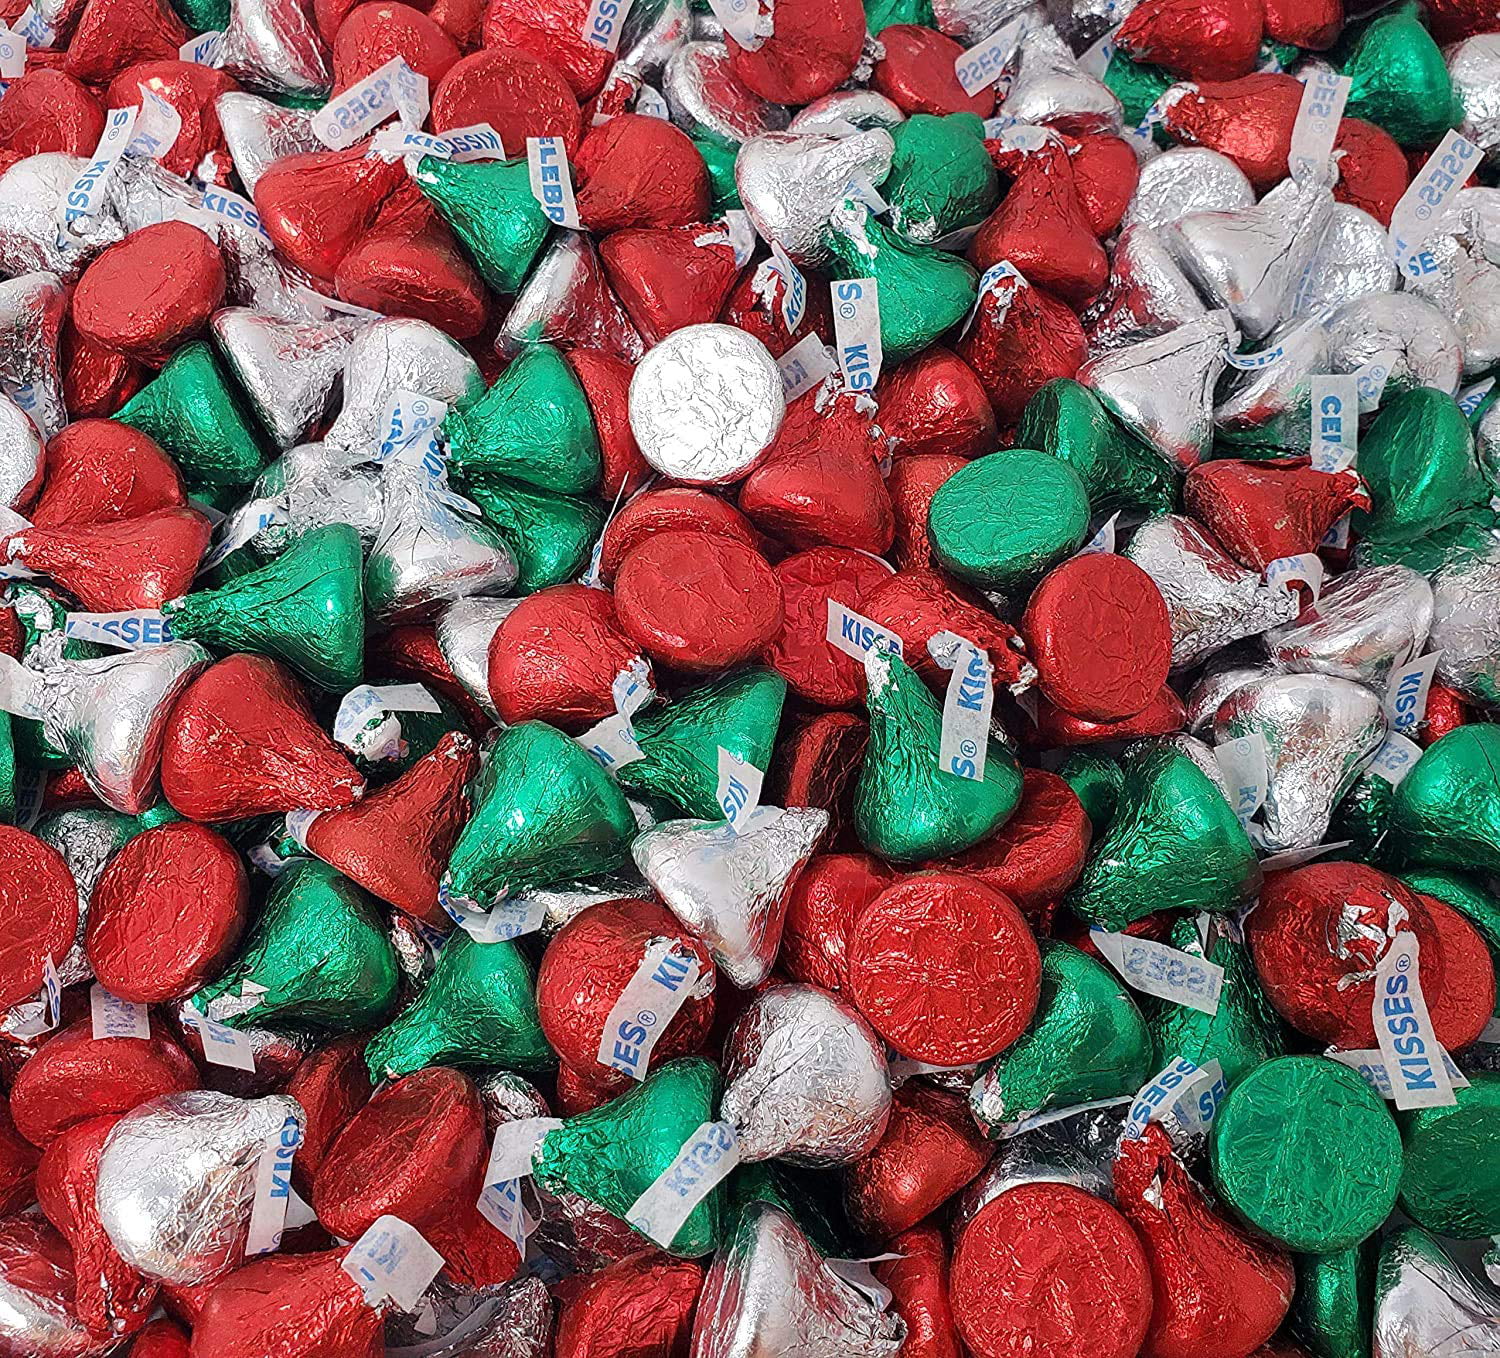 Hersheys Kisses Bulk Milk Chocolate Candy Assortment Red Green And Silver Foil Individually